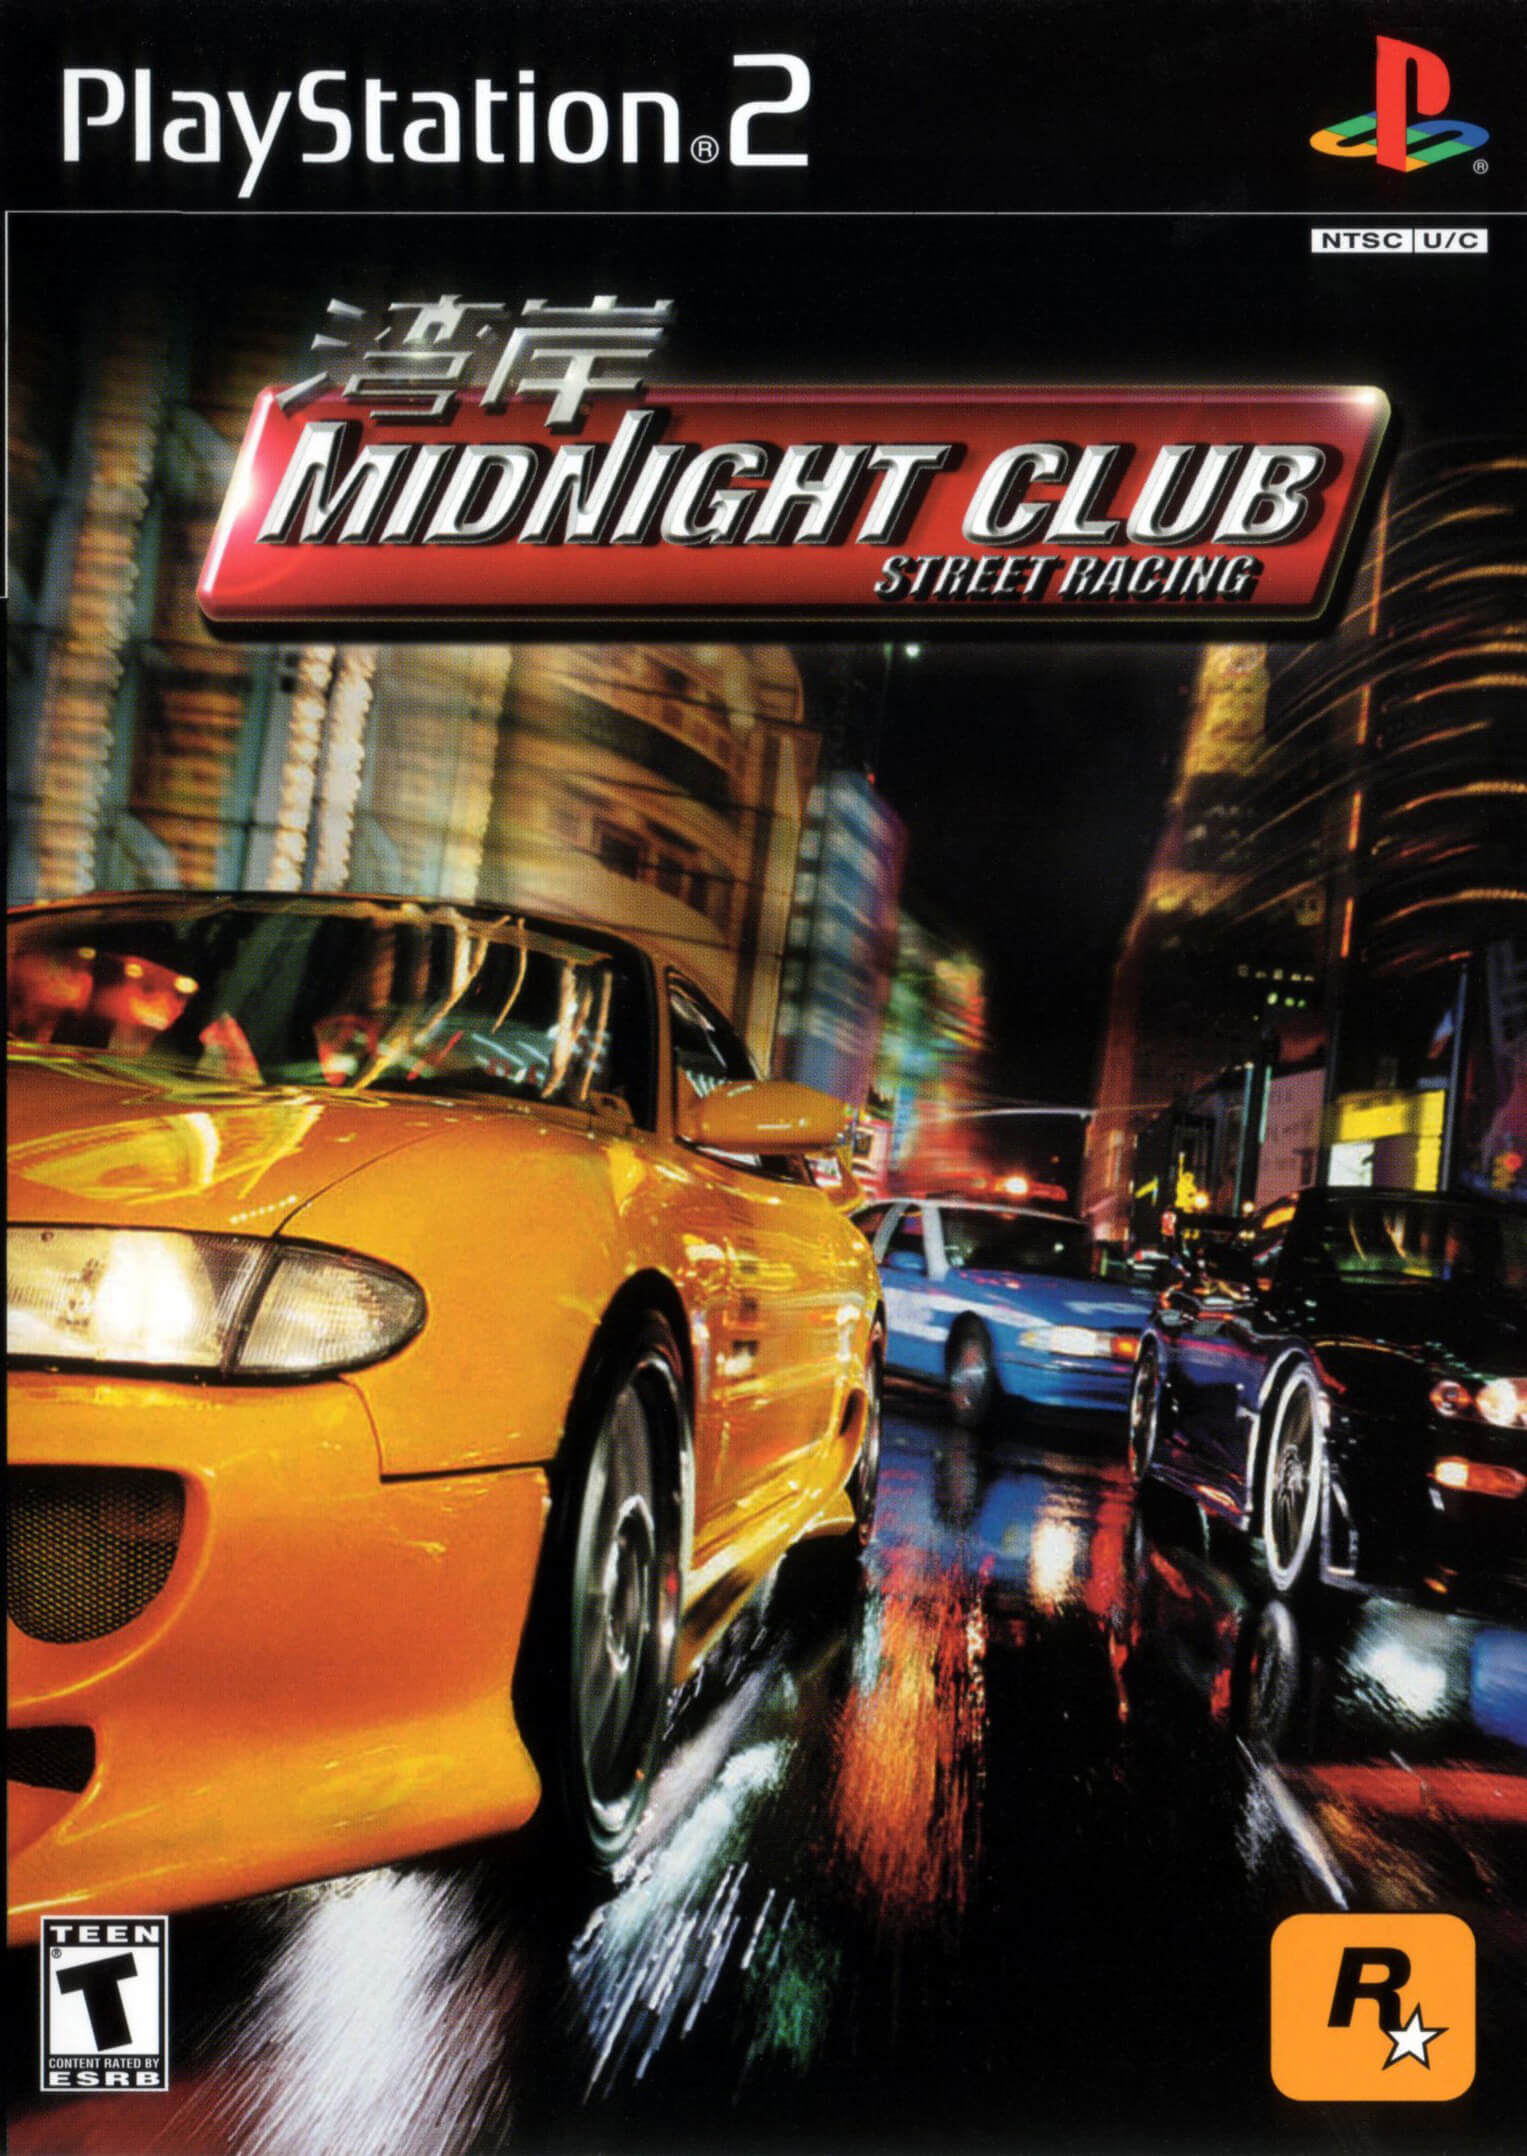 Midnight Club: Street Racing - PS2 ROM & ISO Game Download